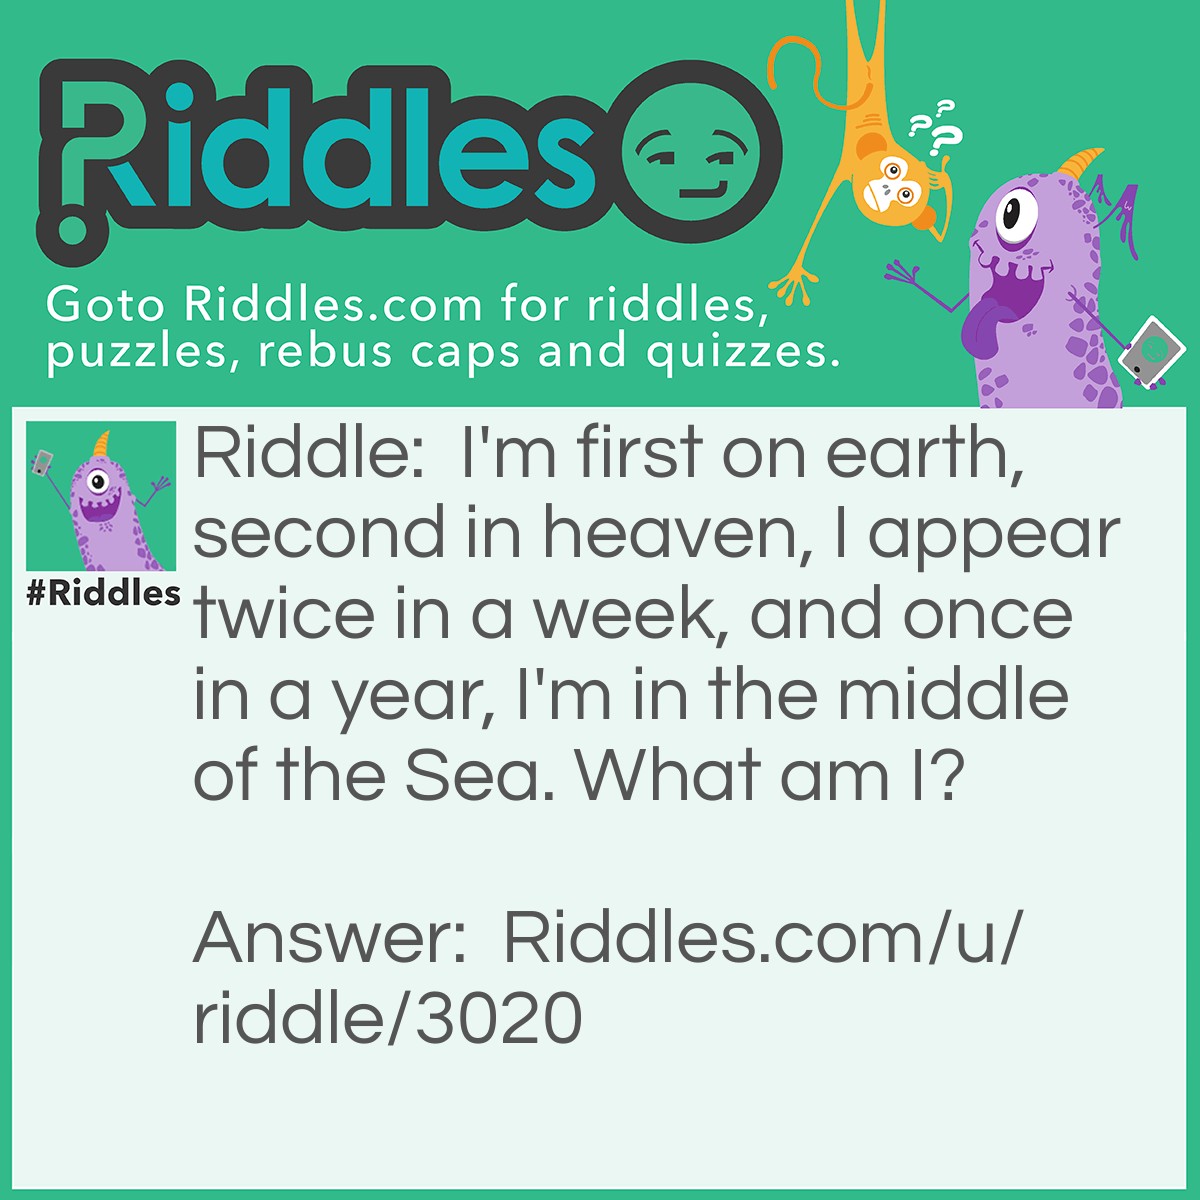 Riddle: I'm first on earth, second in heaven, I appear twice in a week, and once in a year, I'm in the middle of the Sea. What am I? Answer: The letter E.